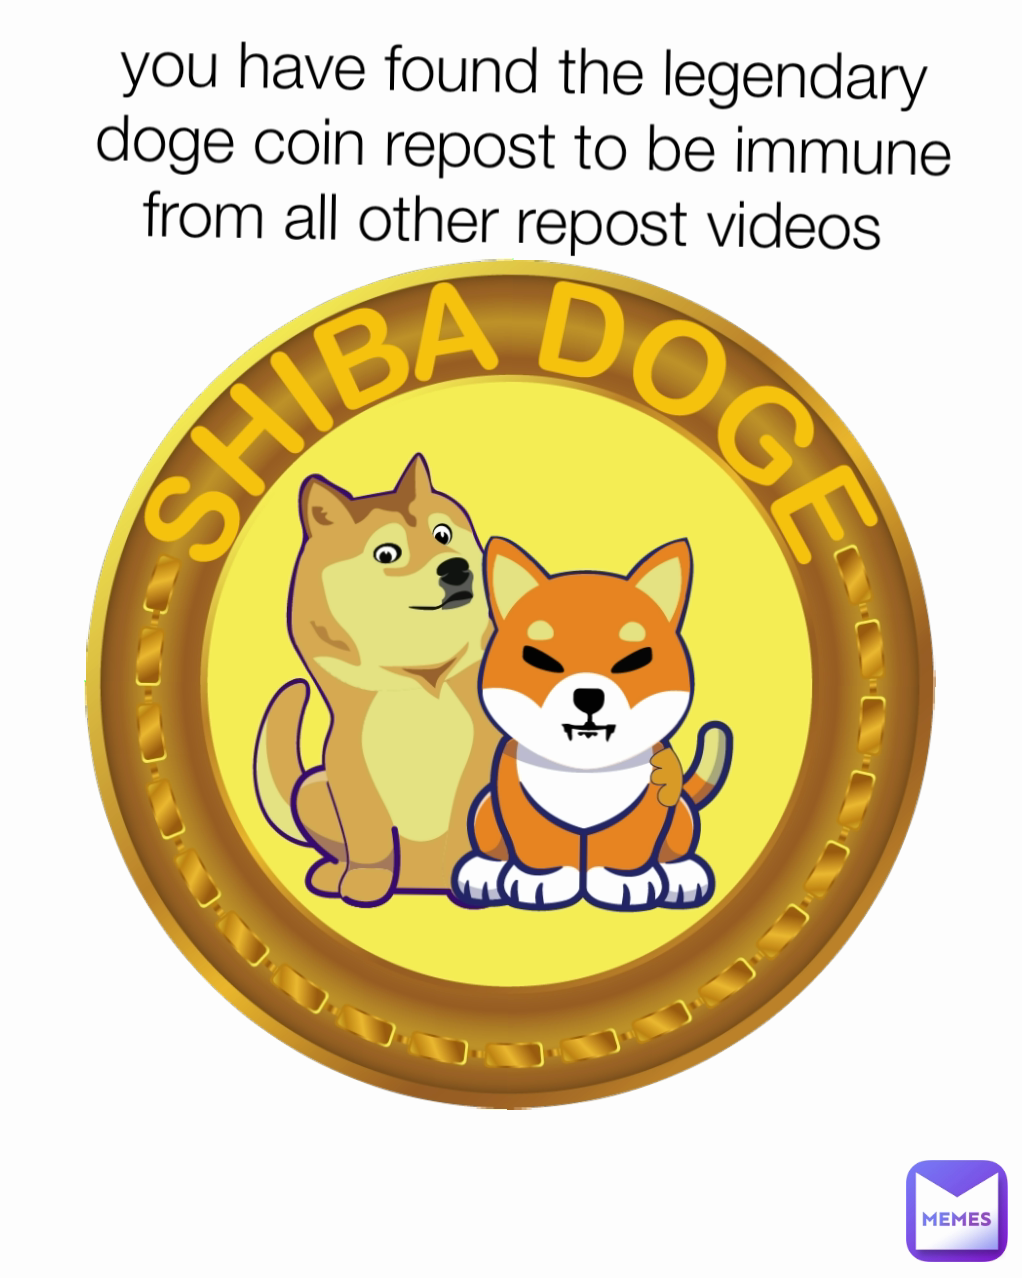 you have found the legendary doge coin repost to be immune from all other repost videos 